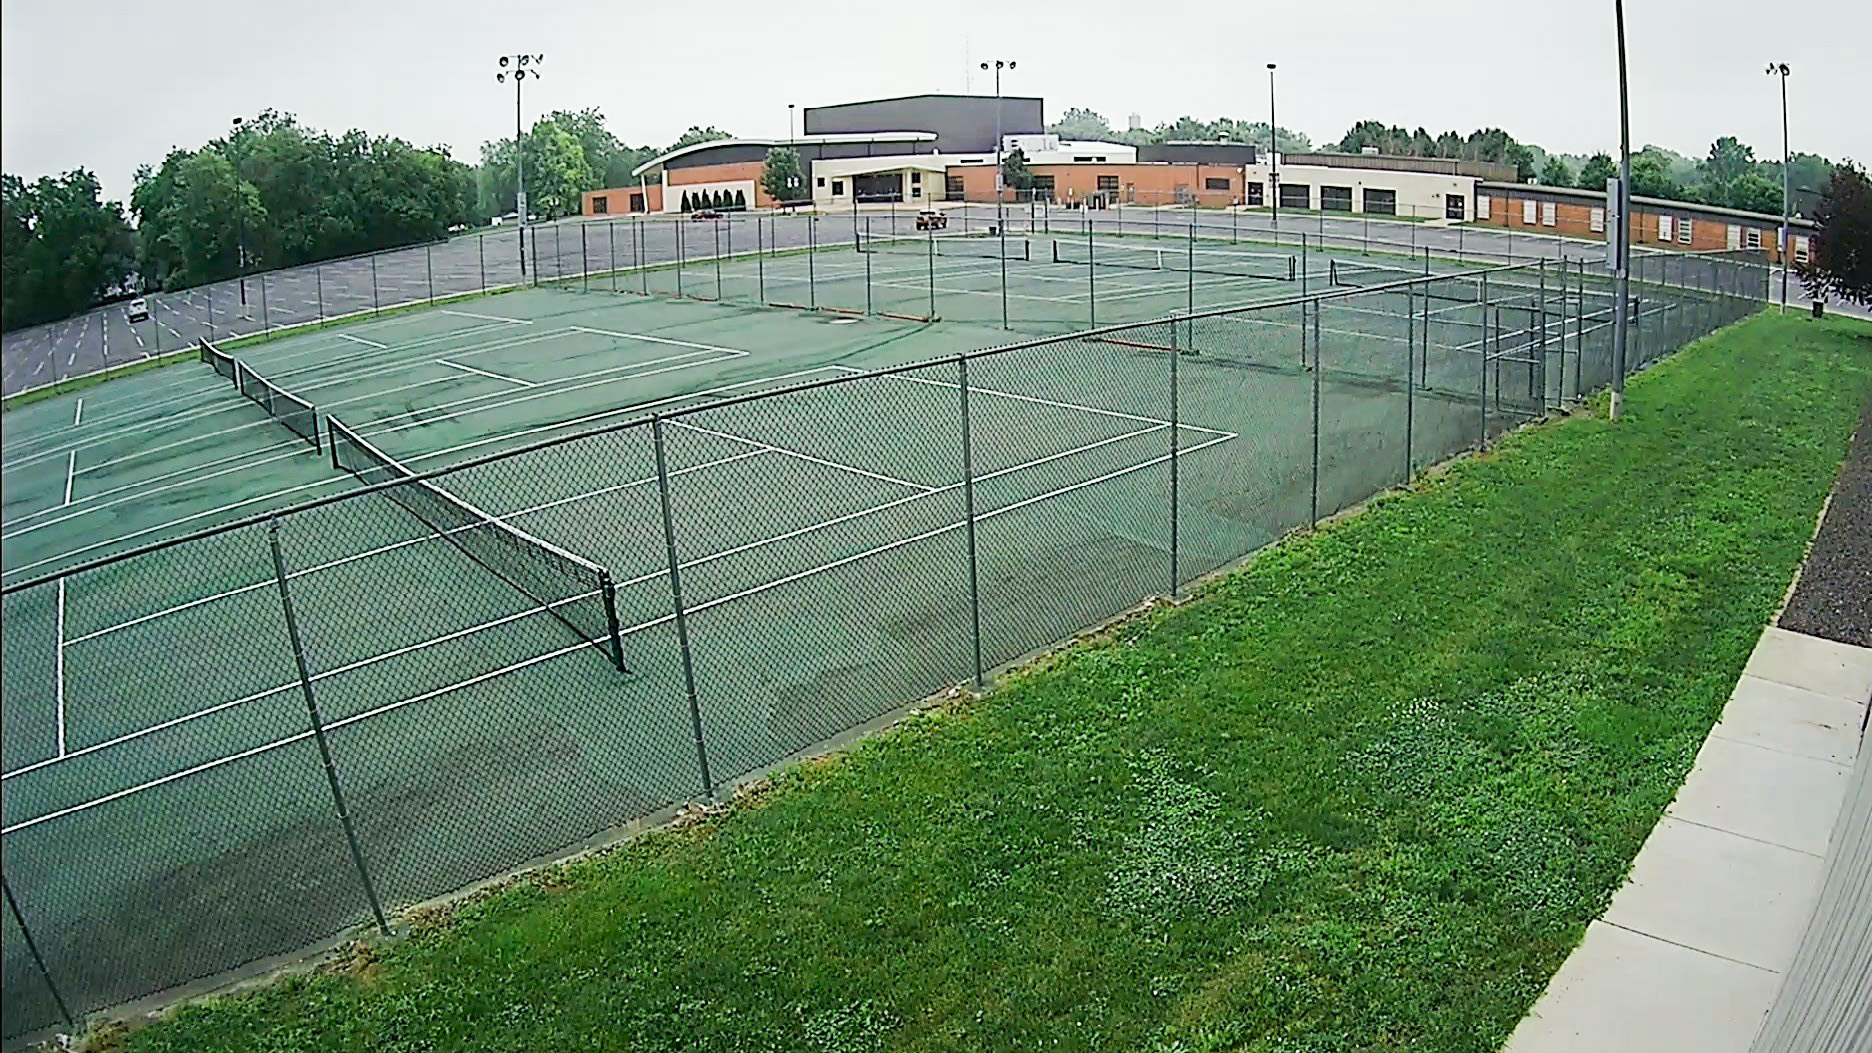 Security camera footage after HD upgrade on outdoor tennis courts